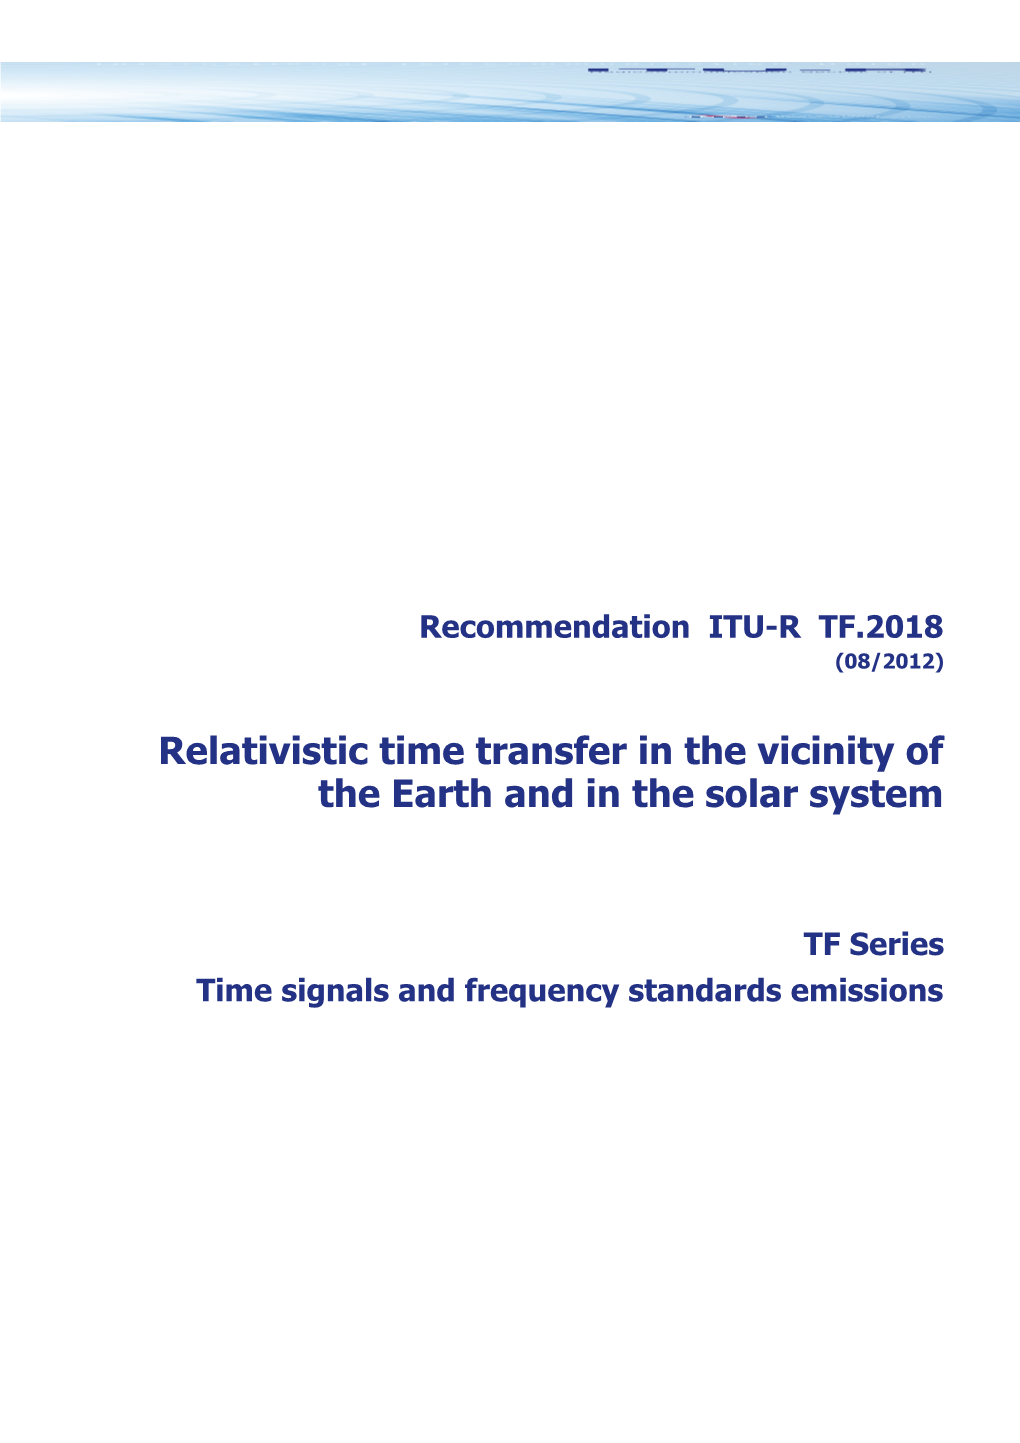 RECOMMENDATION ITU-R TF.2018 - Relativistic Time Transfer in the Vicinity of the Earth